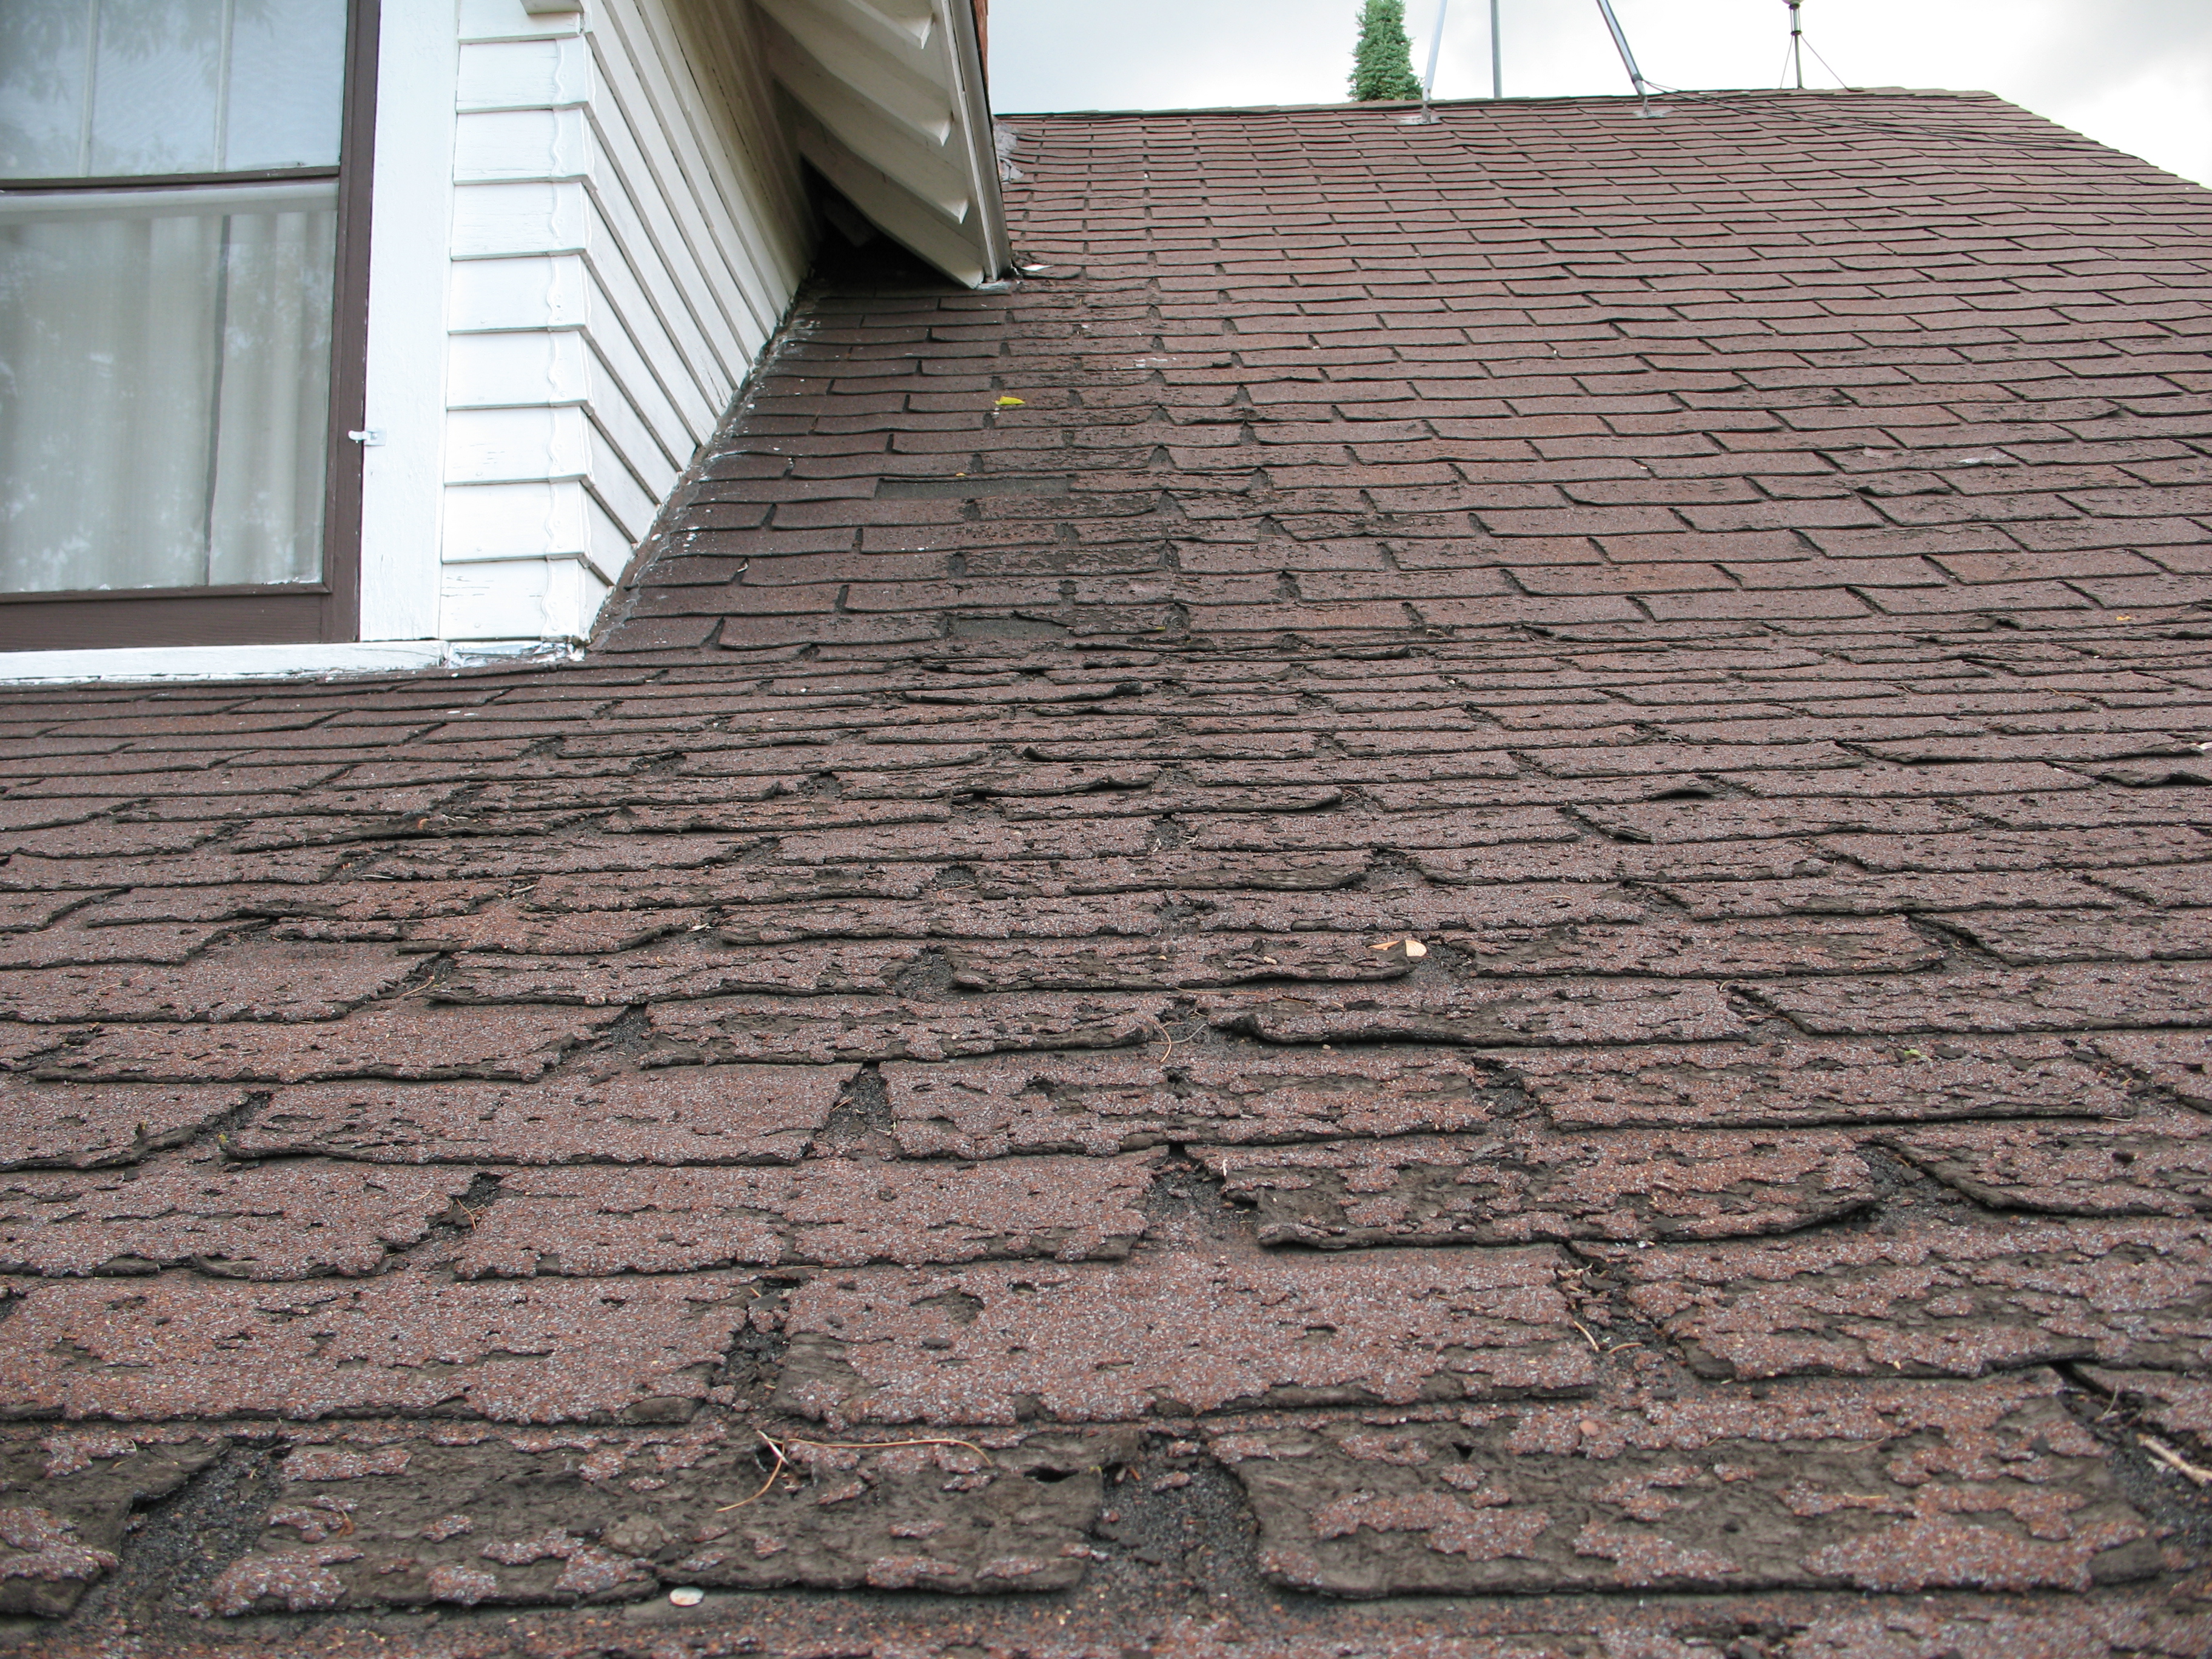 How Often To Replace Roof?